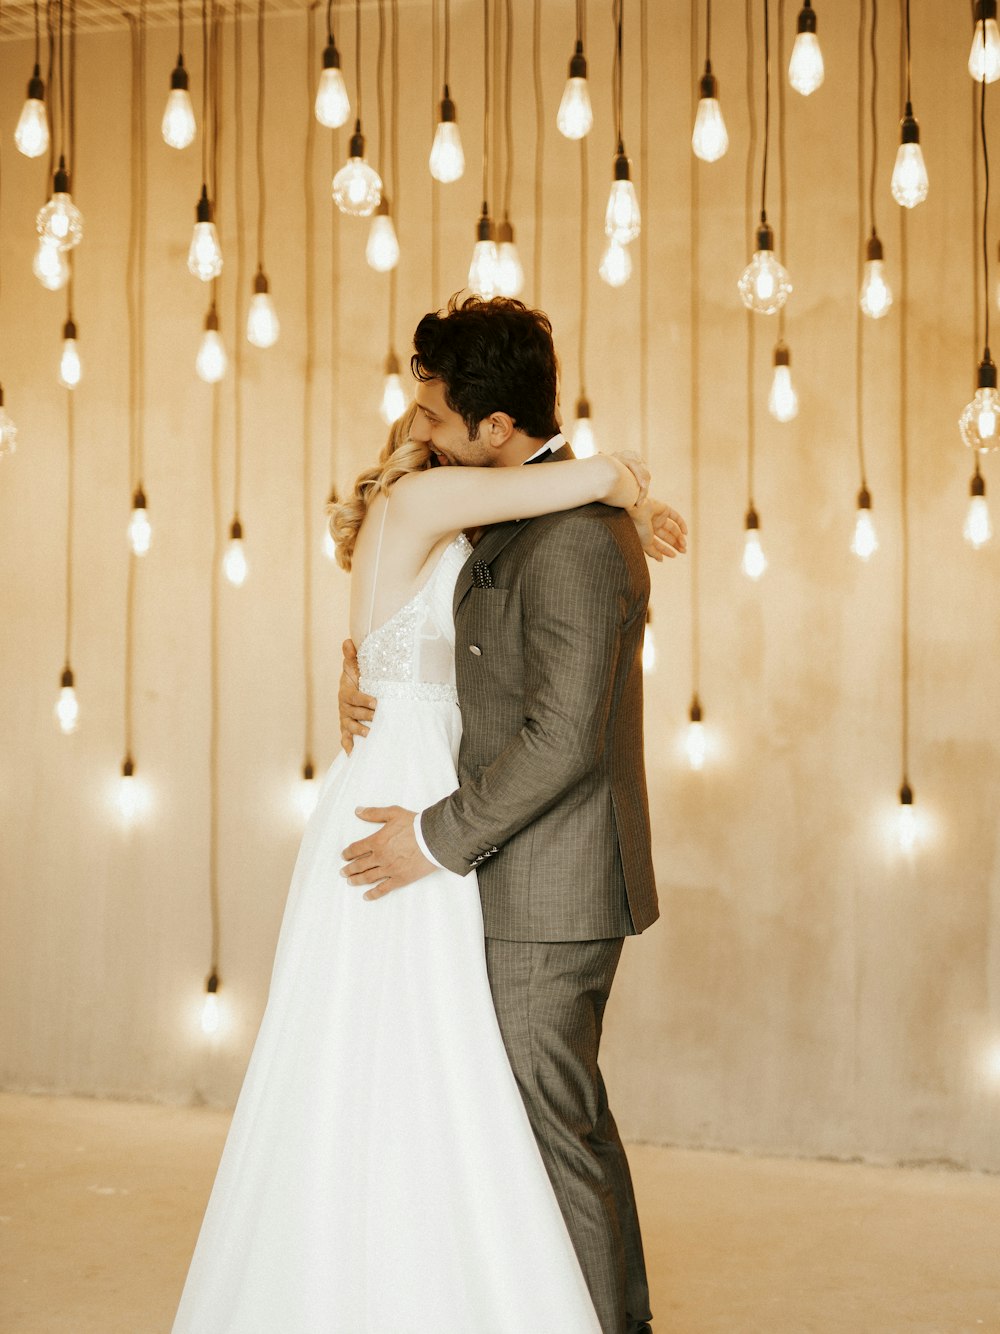 a bride and groom embrace in front of a string of lights